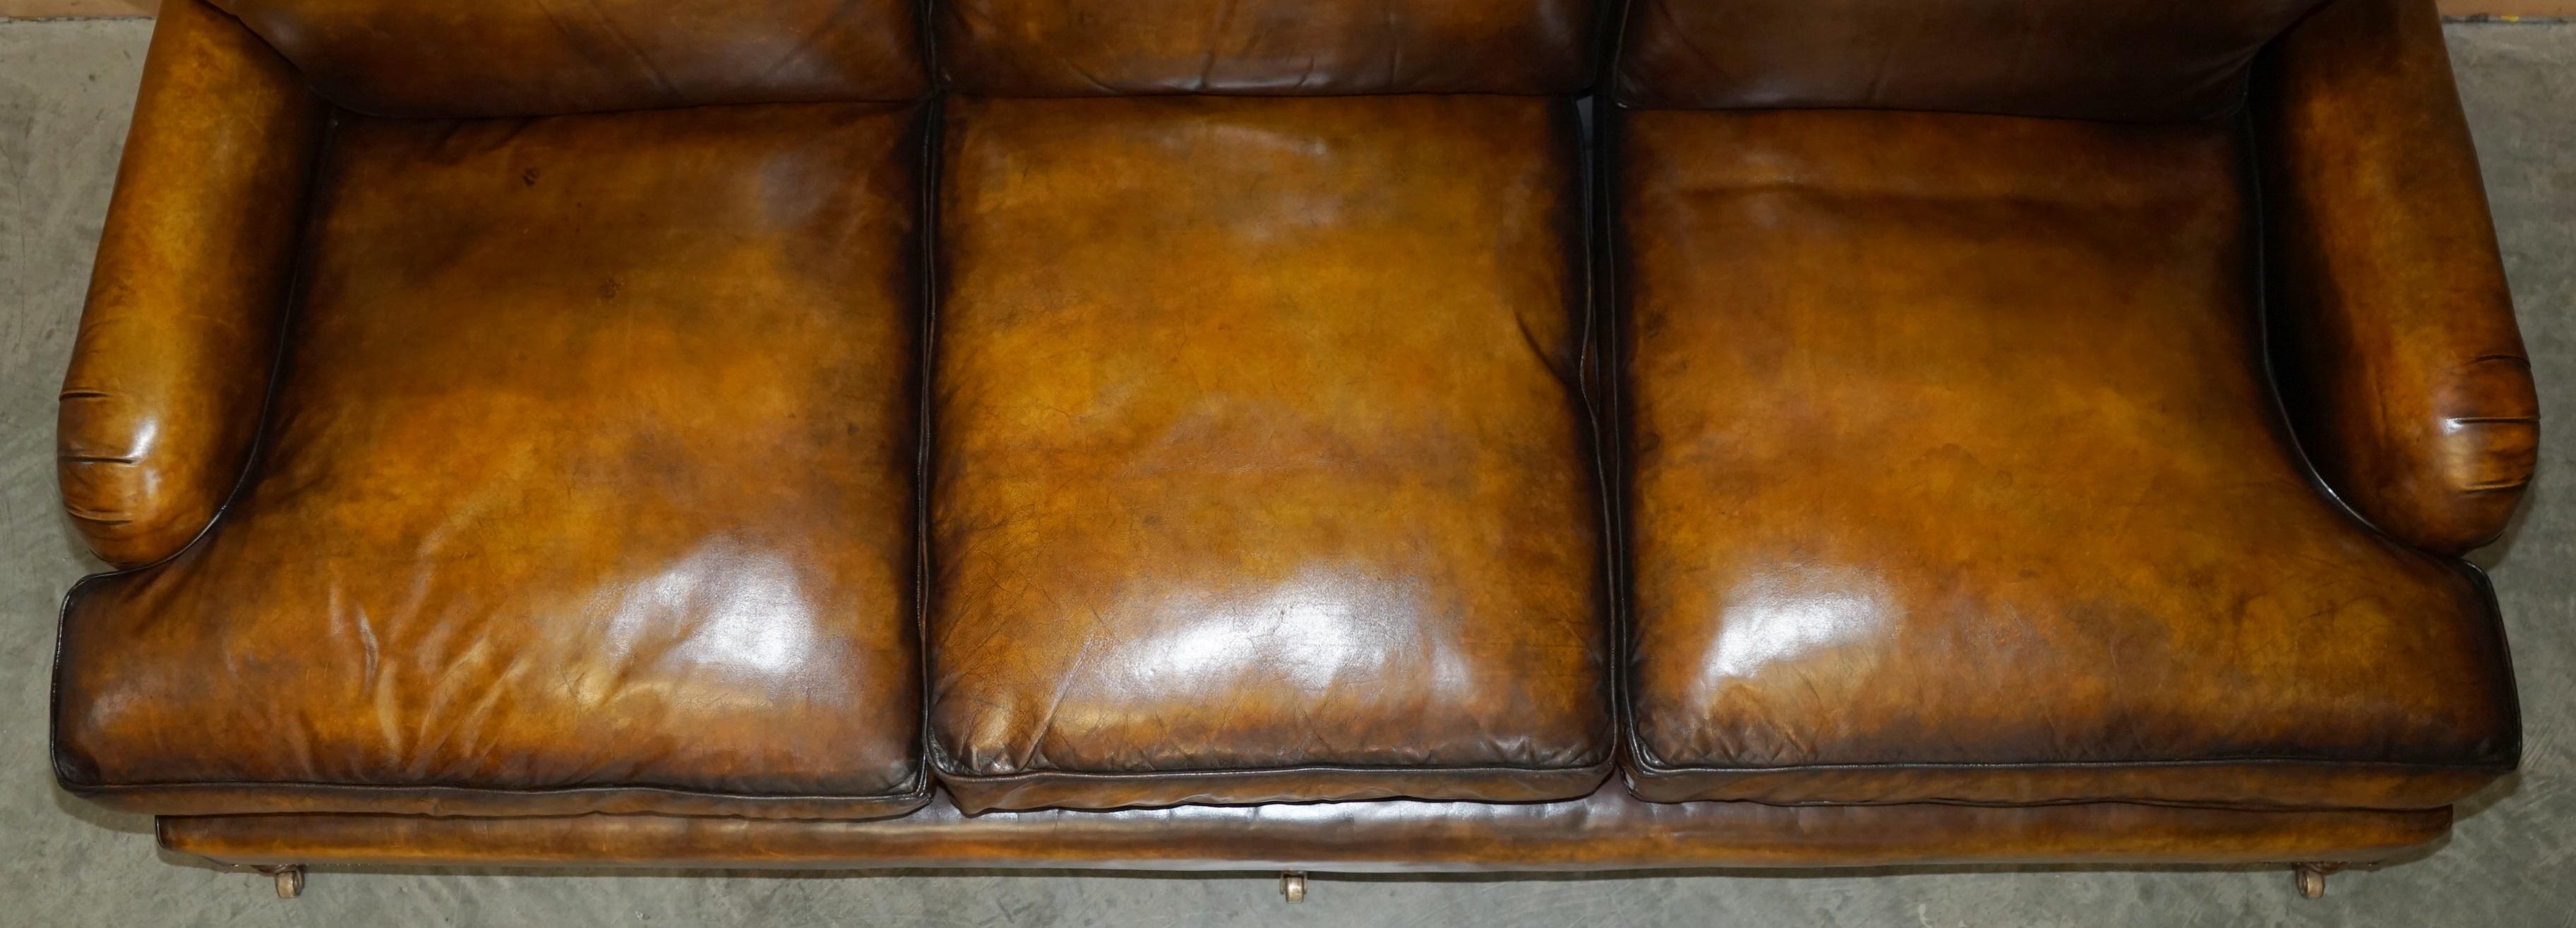 GEORGE SMITH RESTORED HOWARD & SON'S BROWN LEATHER SiGNATURE SCROLL ARM SOFA For Sale 5